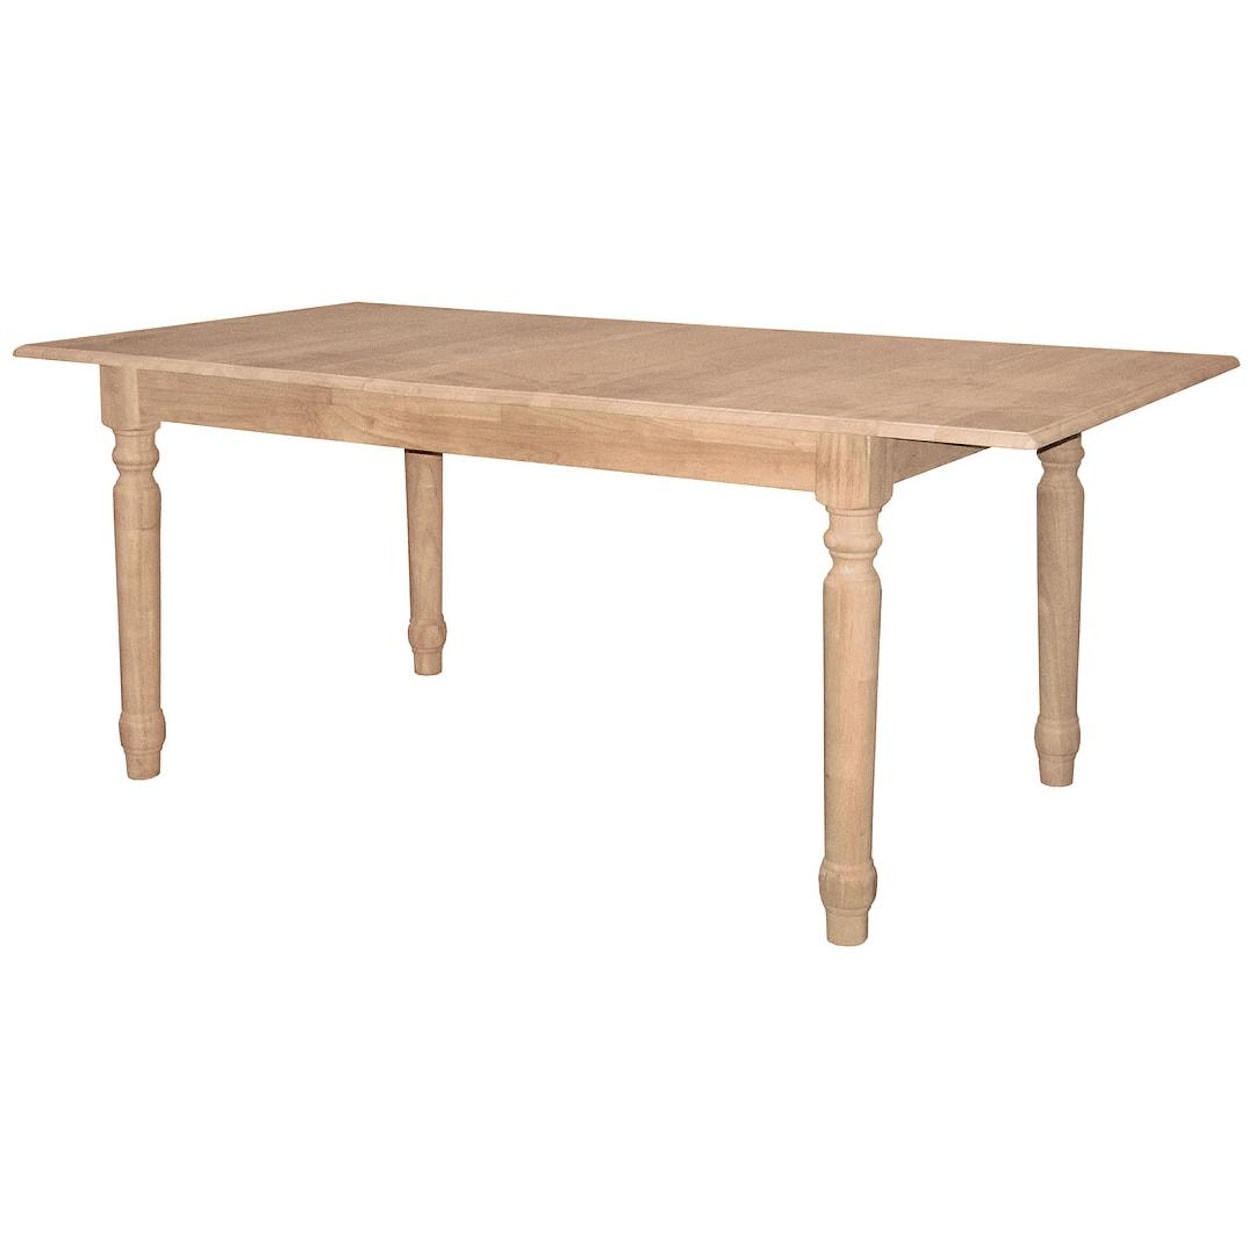 John Thomas SELECT Dining Butterfly Leaf Extension Table with Turned L